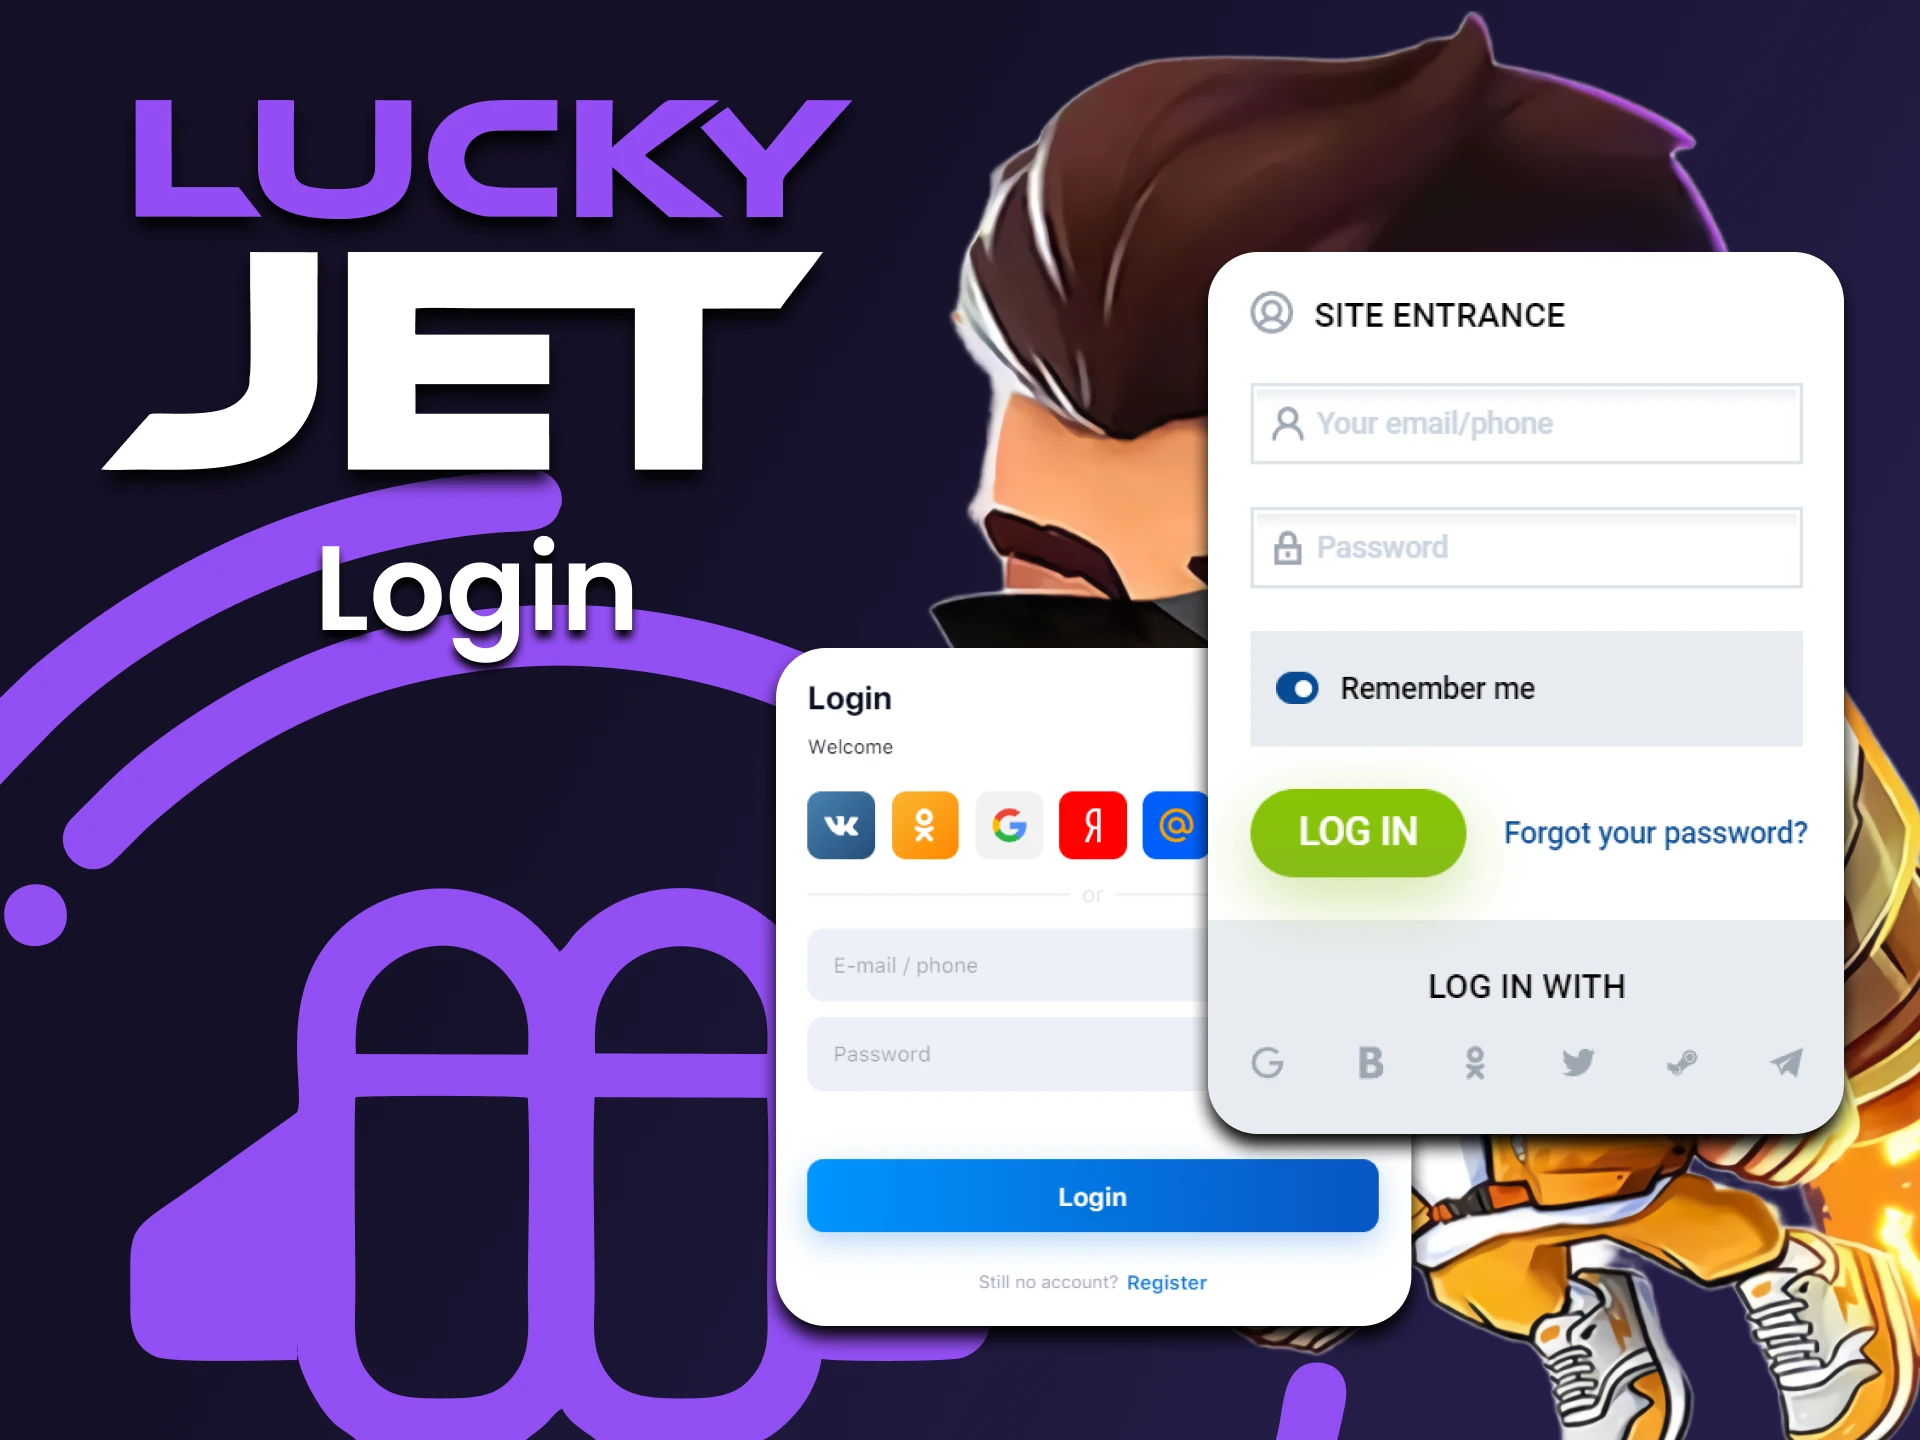 Log in to your personal account to start playing Lucky Jet.